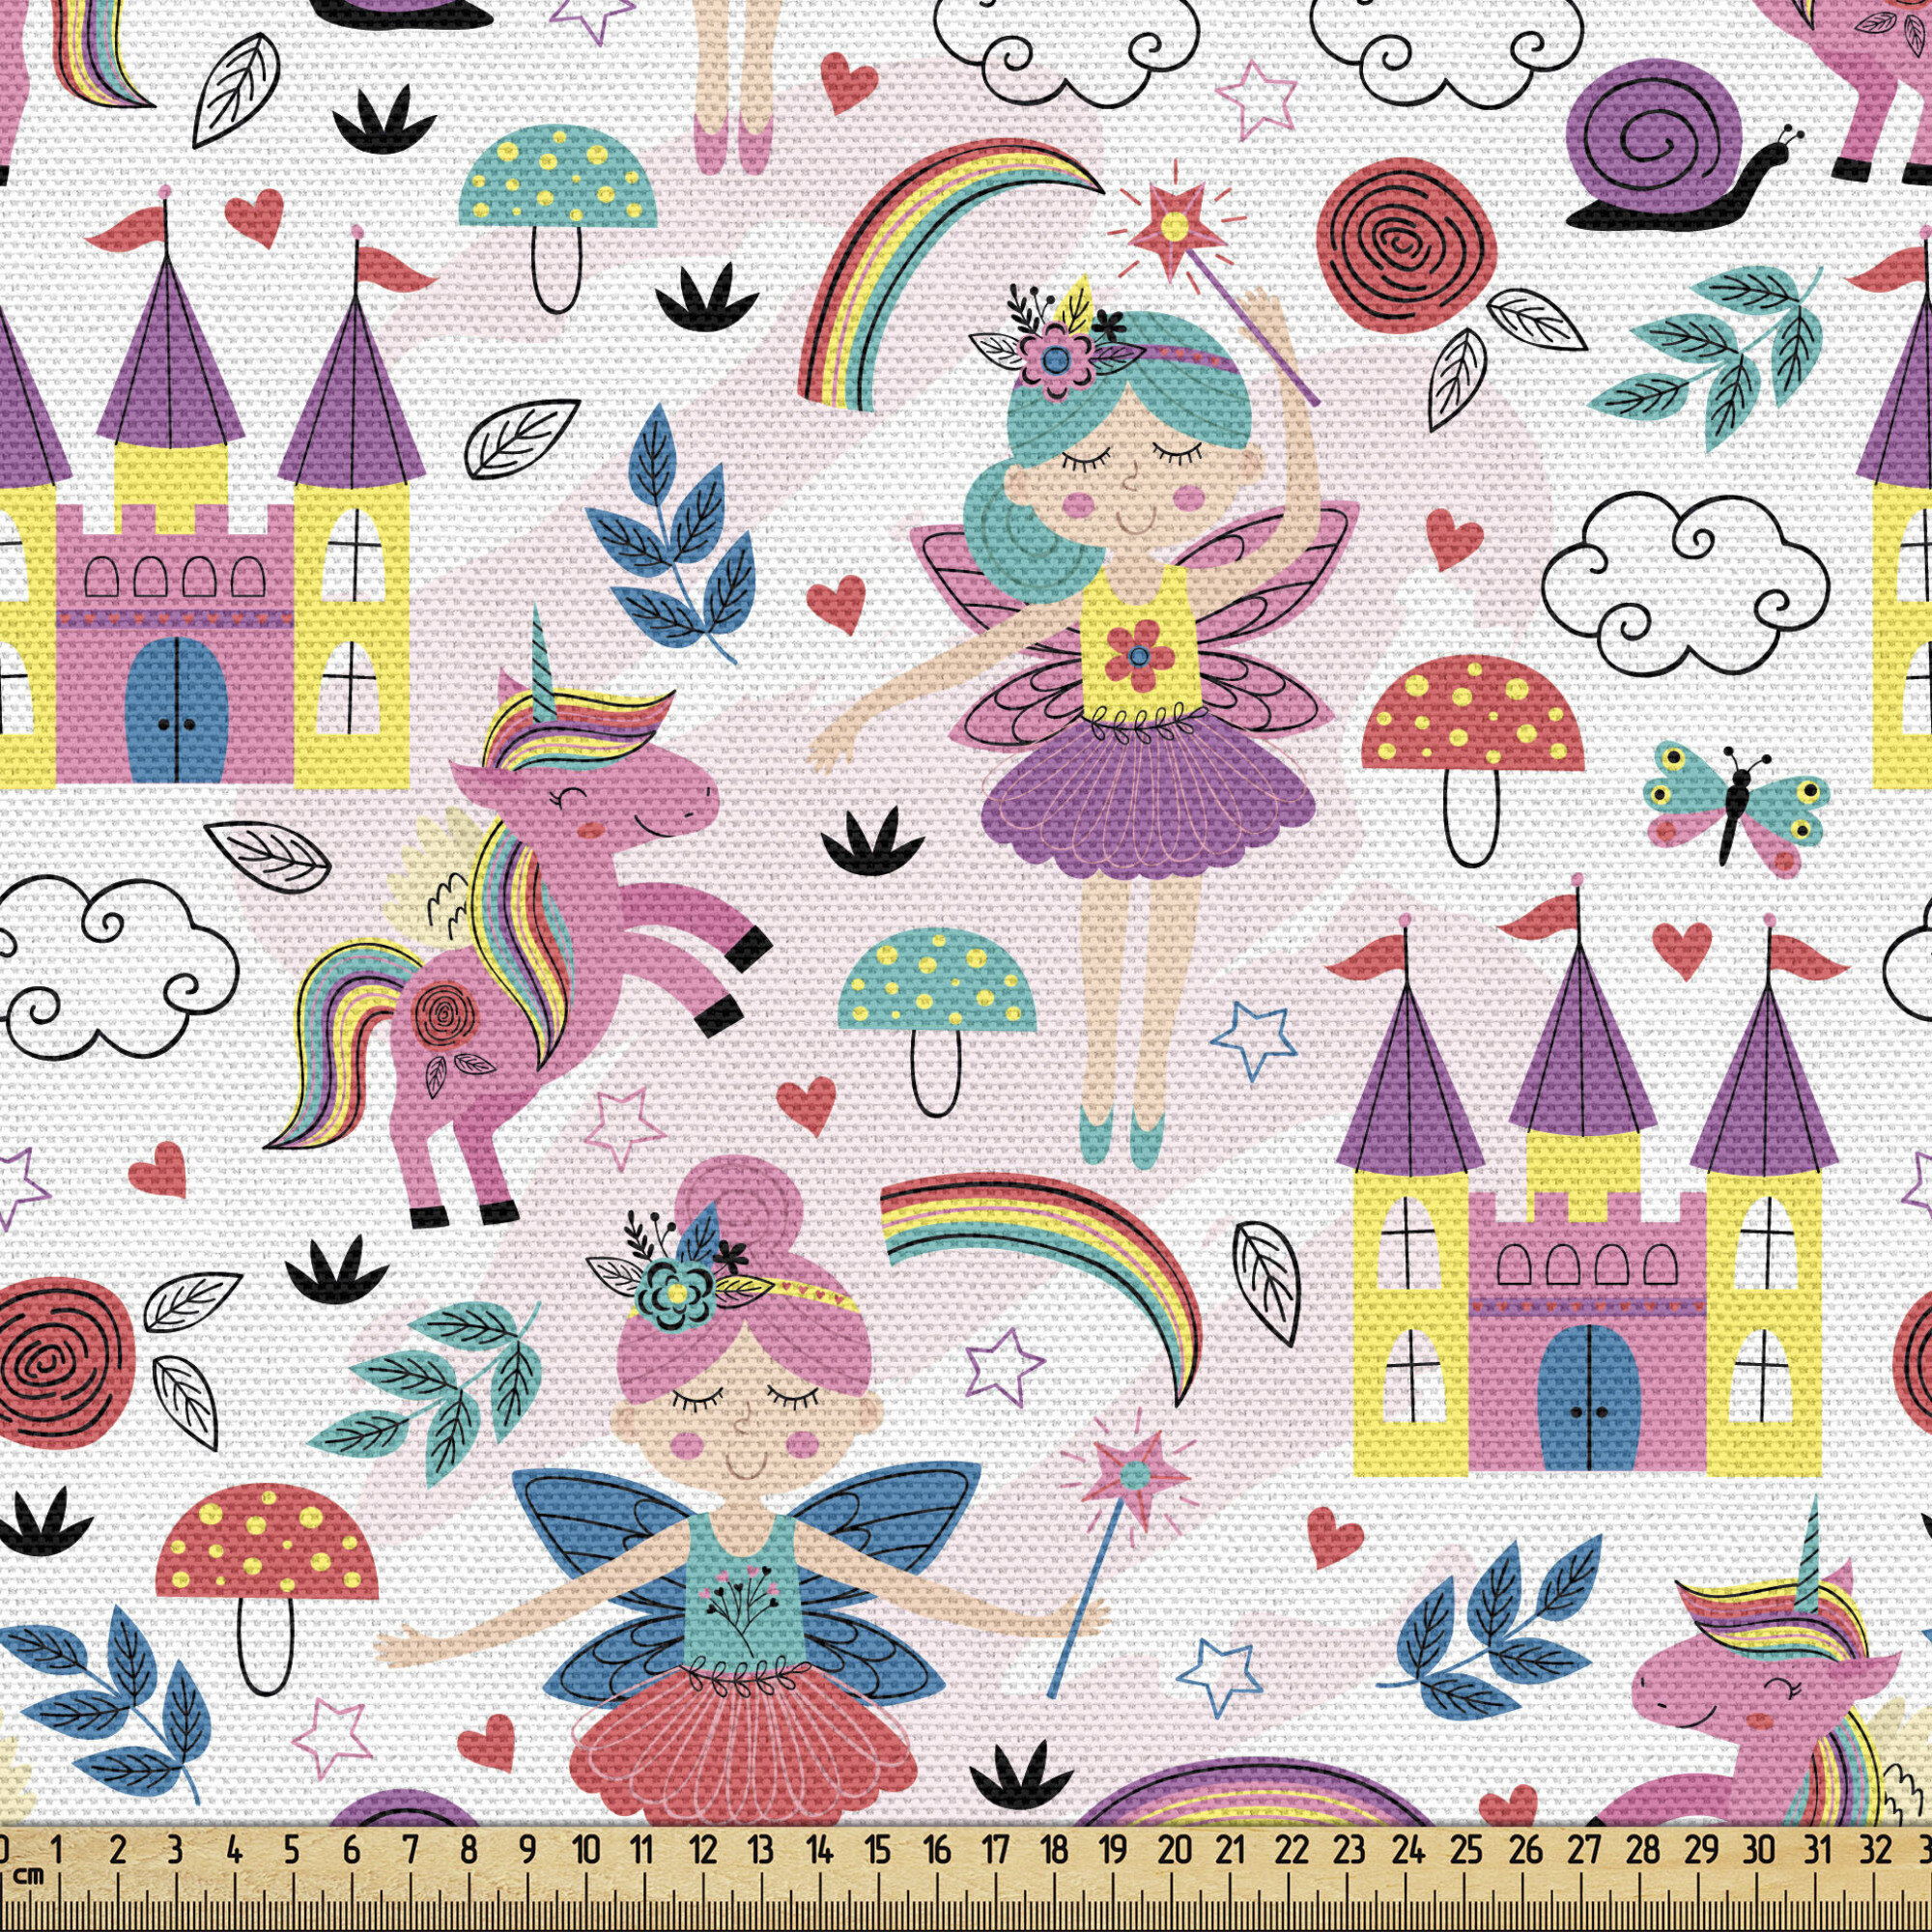 East Urban Home Ambesonne Cartoon Fabric By The Yard, Colourful  Illustration With Characters Unicorn Chateau On Plain Background,  Decorative Fabric For Upholstery And Home Accents,Multicolor - Wayfair  Canada